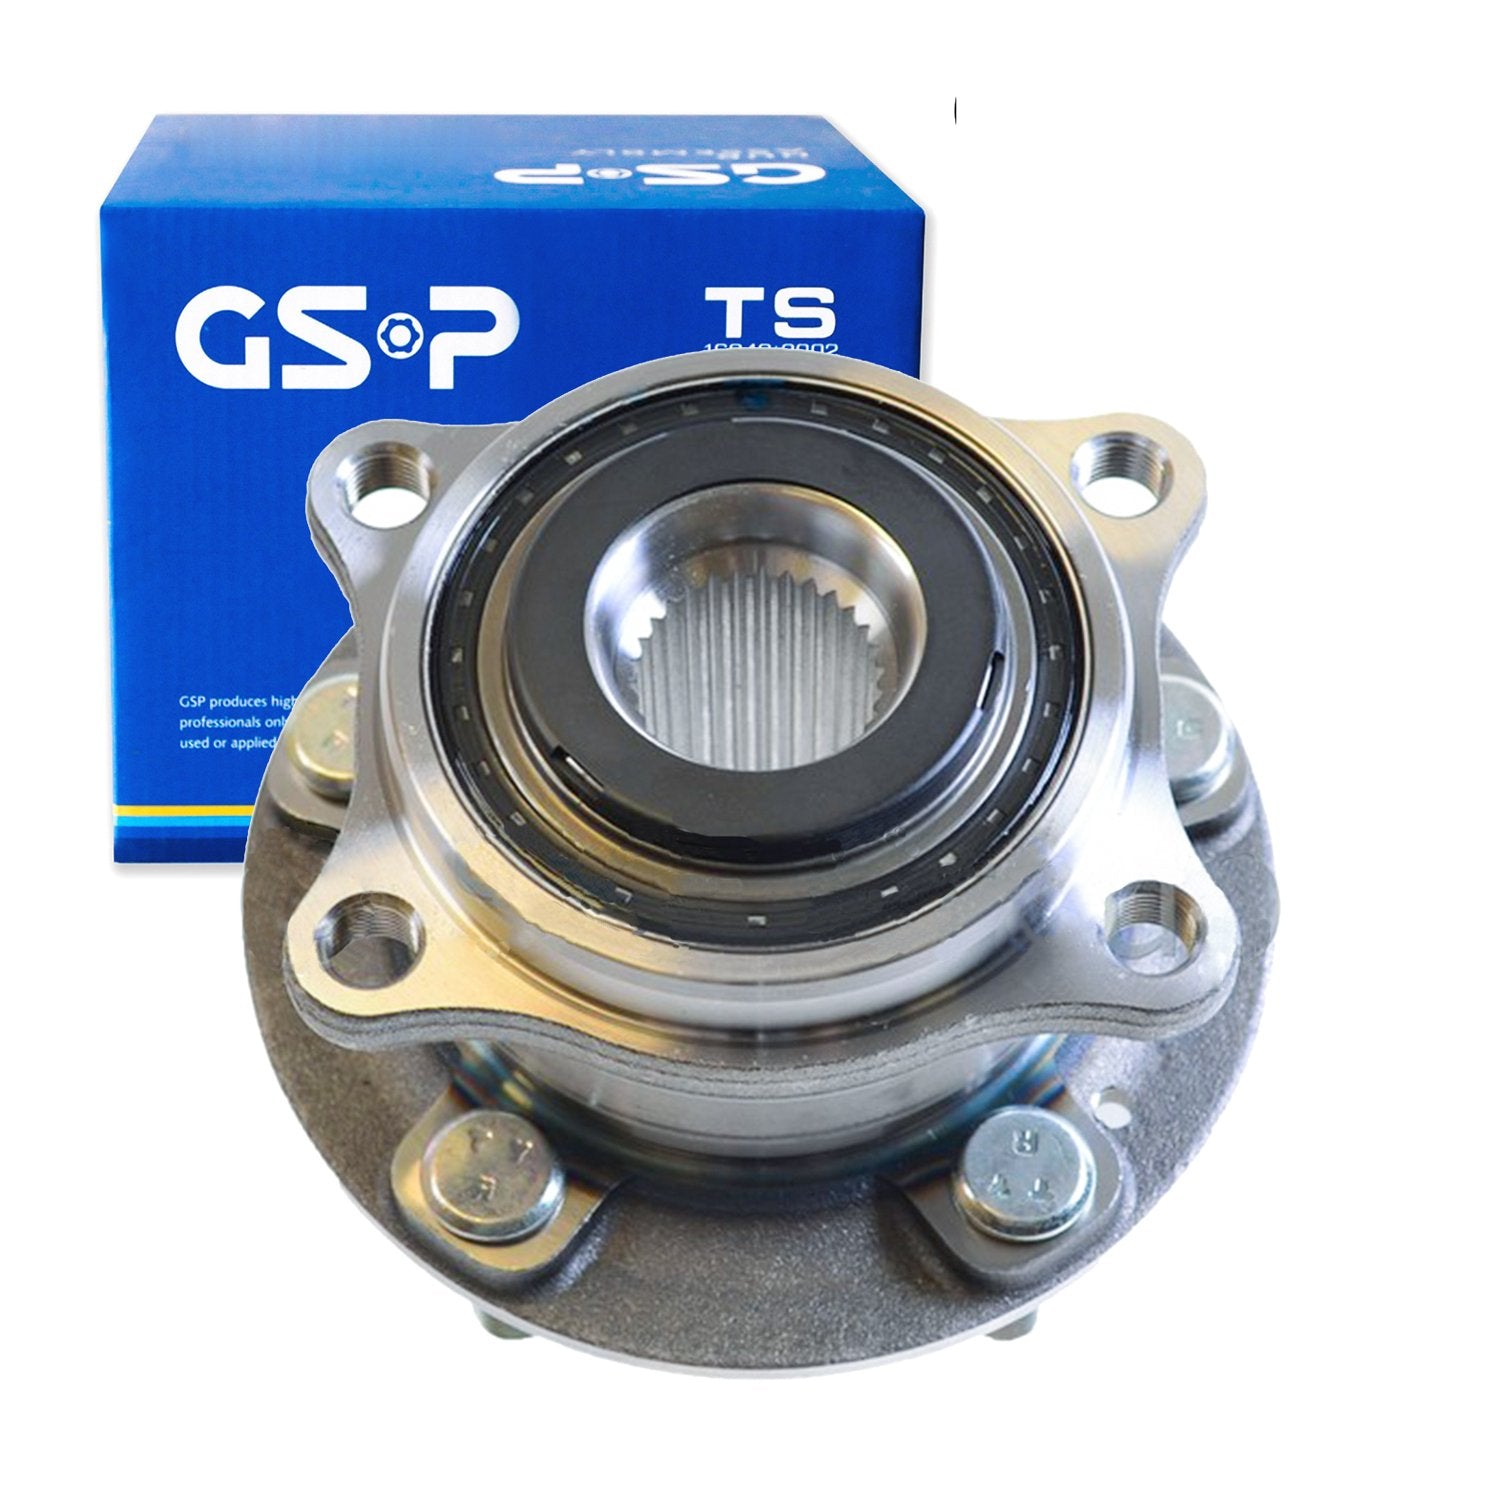 Hub Assembly, GSP+WINPOWER, 42450-12040, 9400092 (005194) - Win Store